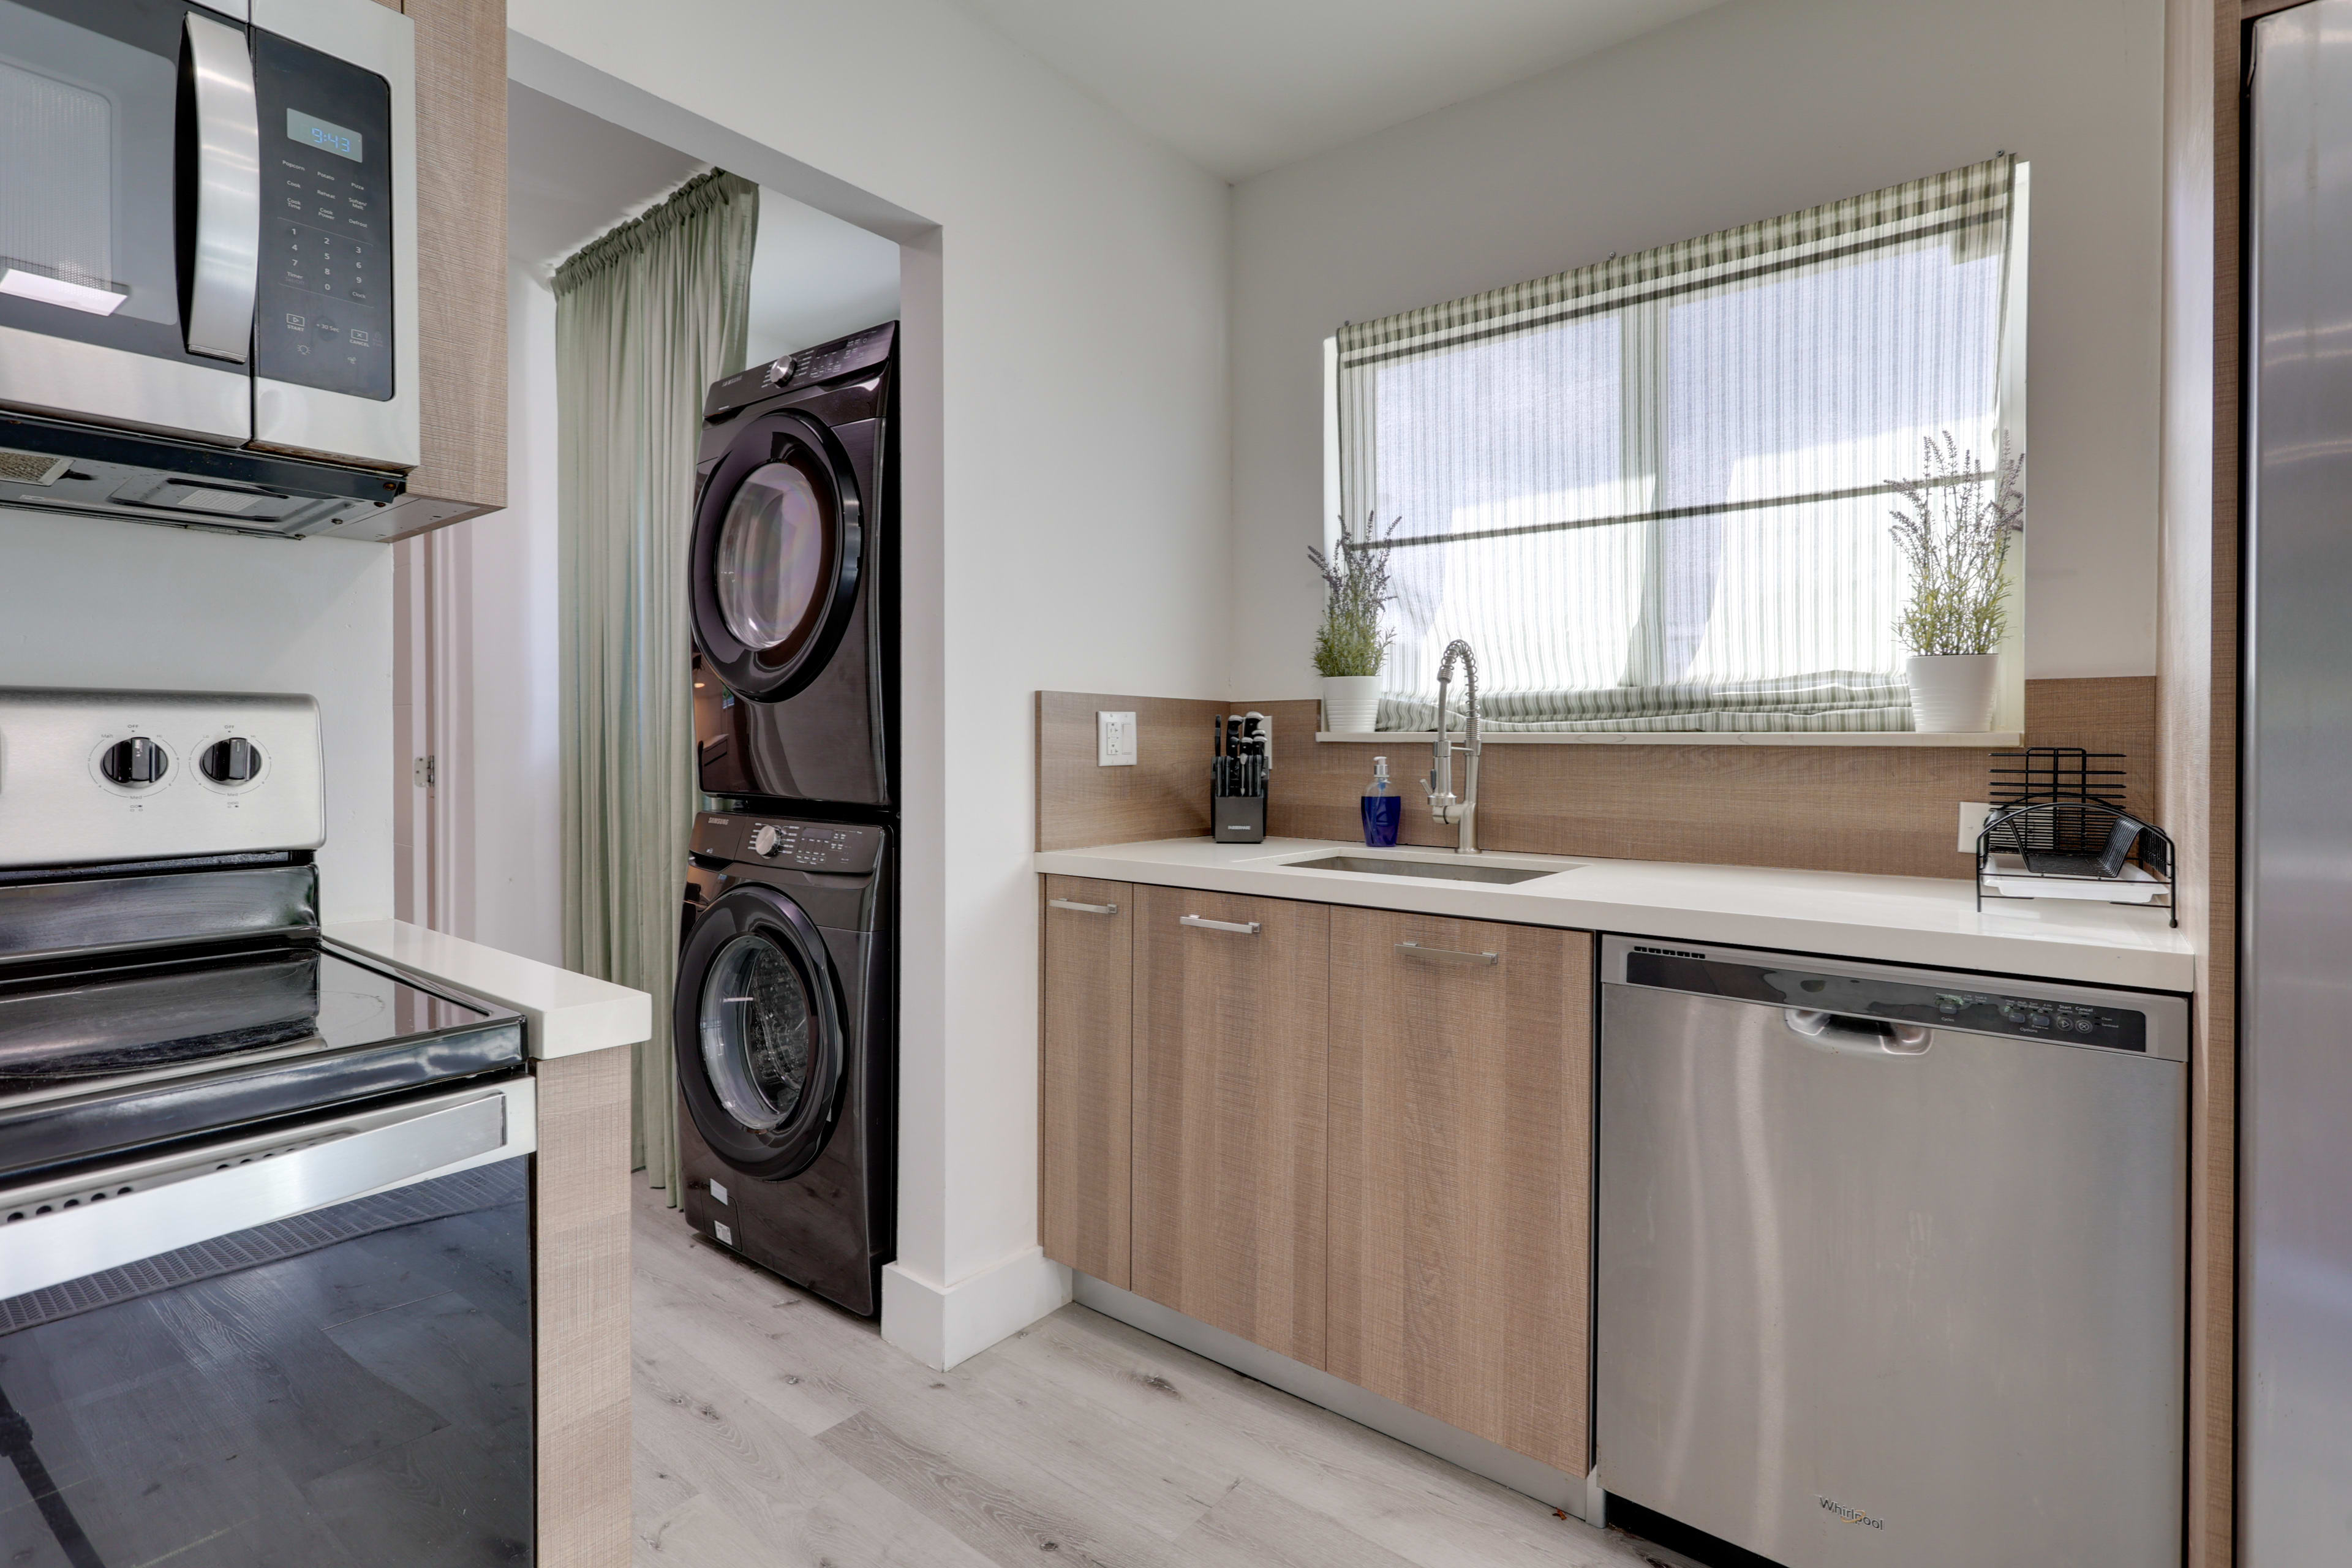 Laundry Area | Washer/Dryer | Laundry Detergent